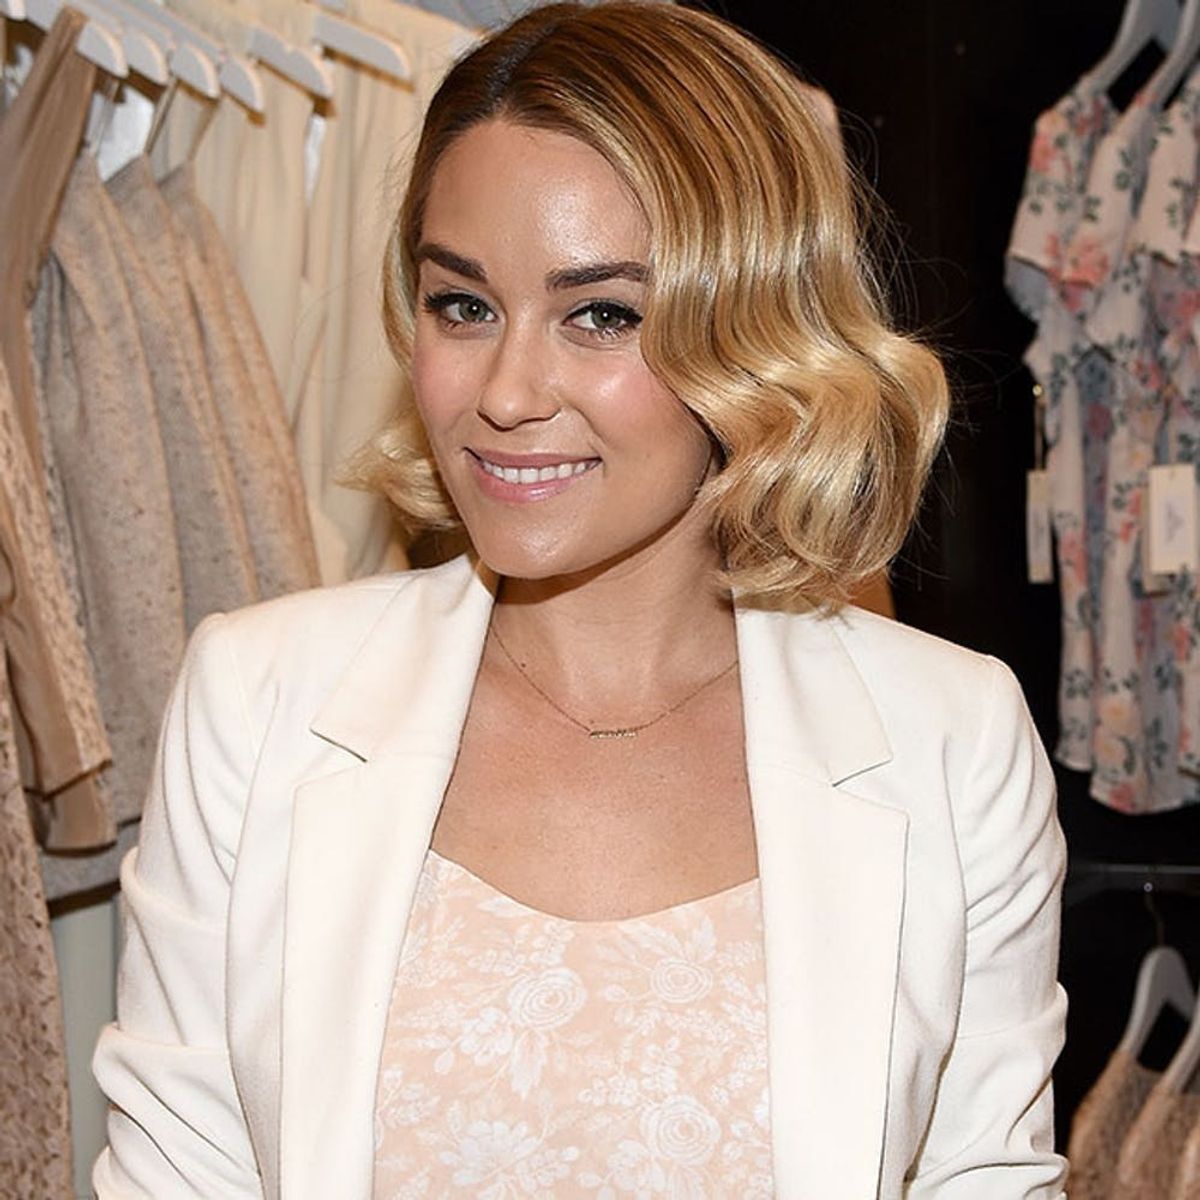 Exclusive: Lauren Conrad Shares What to Wear to Every Spring Event